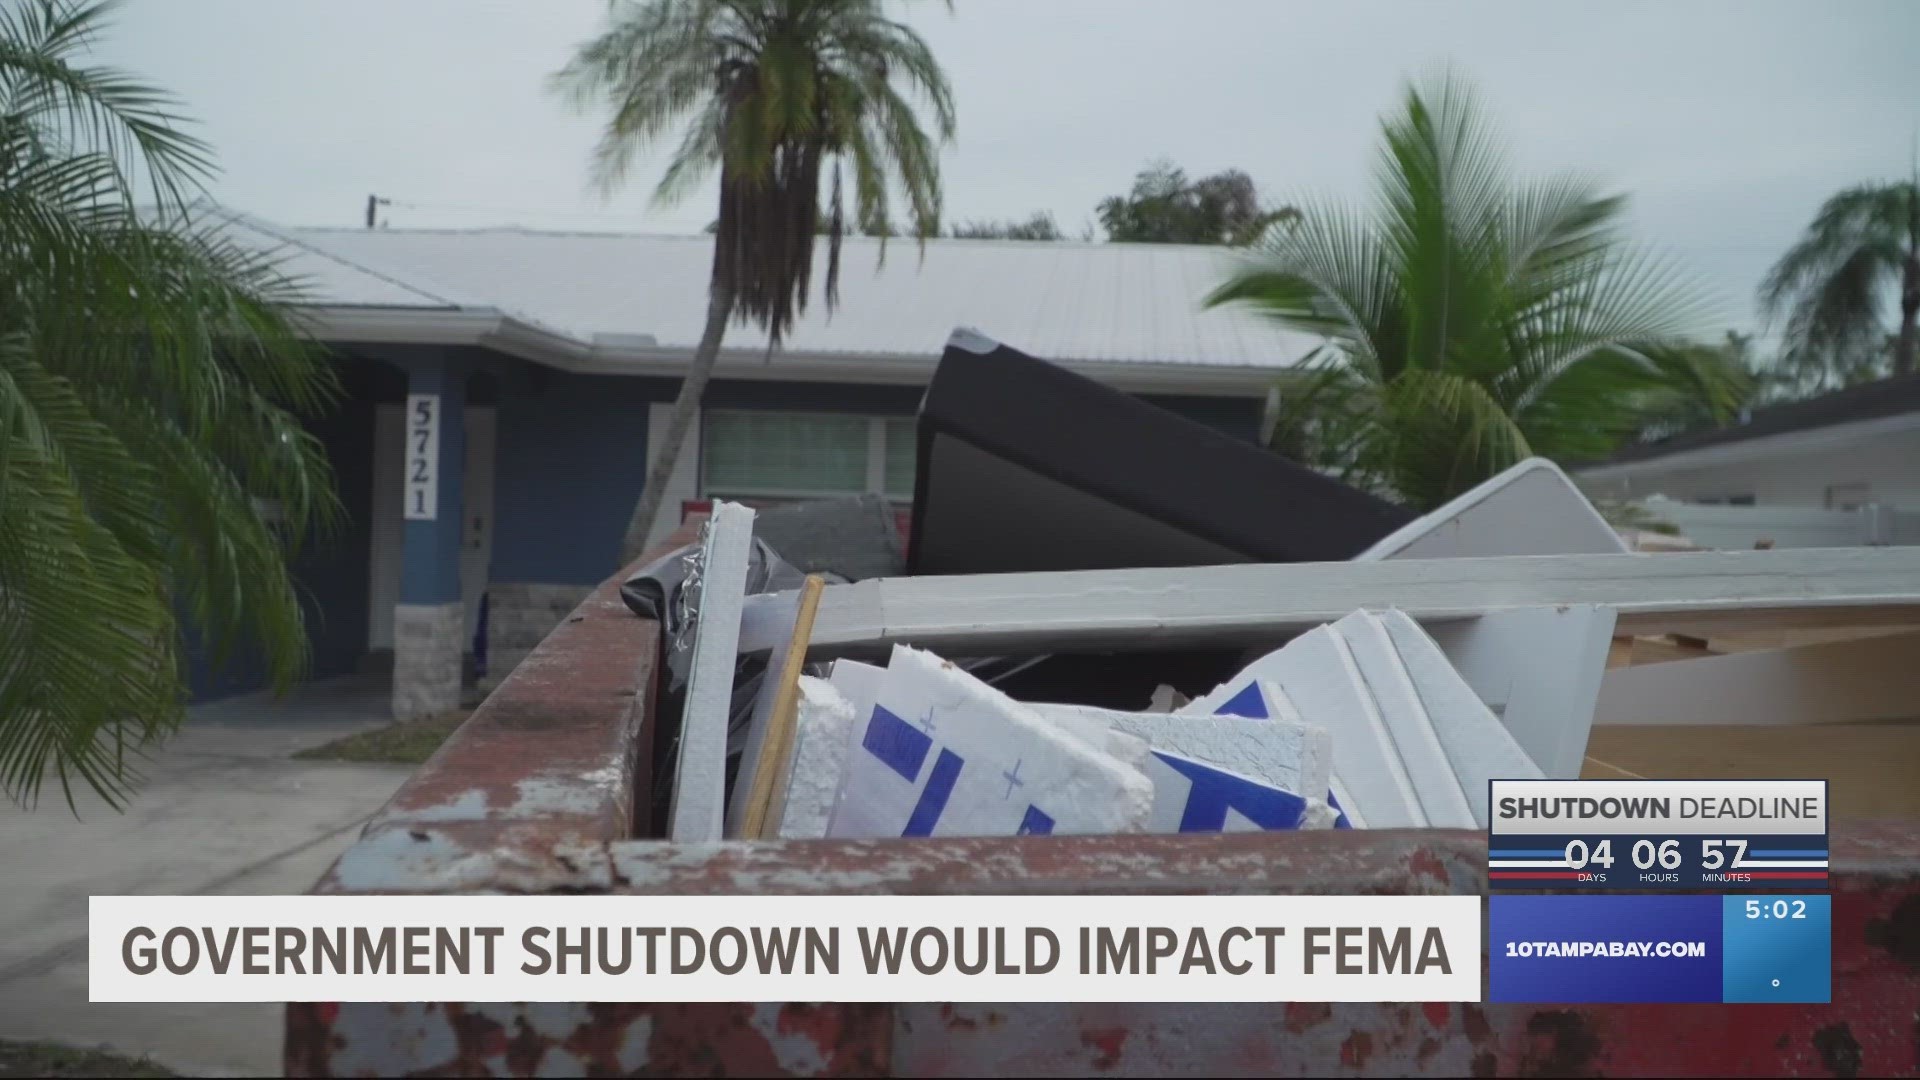 Those who were impacted by Hurricane Idalia could see changes in FEMA funding they receive if the government shuts down.